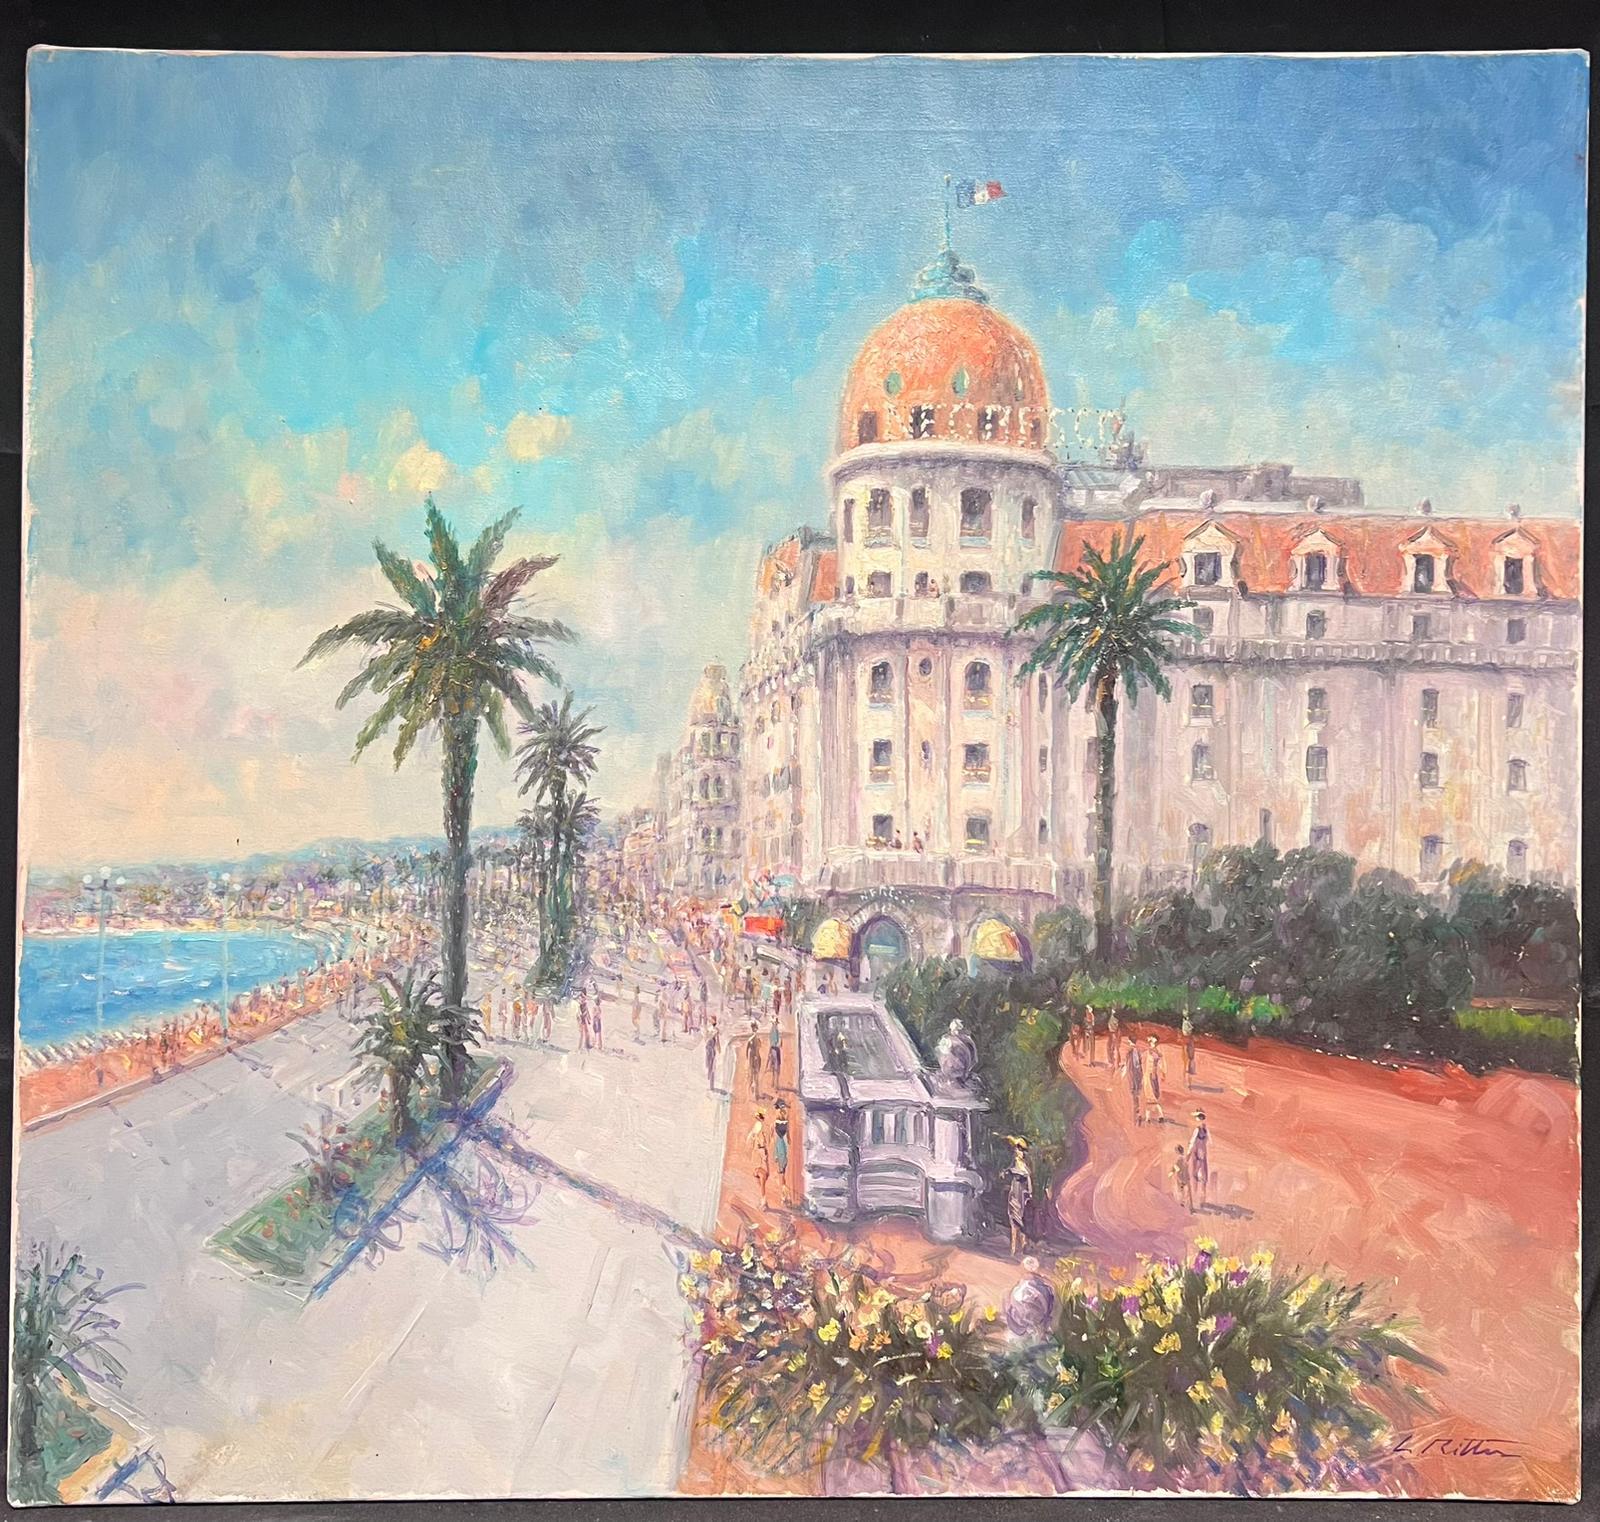 The Hotel Negresco, Nice
Promenade des Anglais, Cote d'Azur
by Laszlo Ritter (Hungarian Impressionist painter, 1937-2003)
signed oil on canvas, unframed
canvas: 28 x 30 inches
provenance: private collection, England
condition: a few minor paint loss